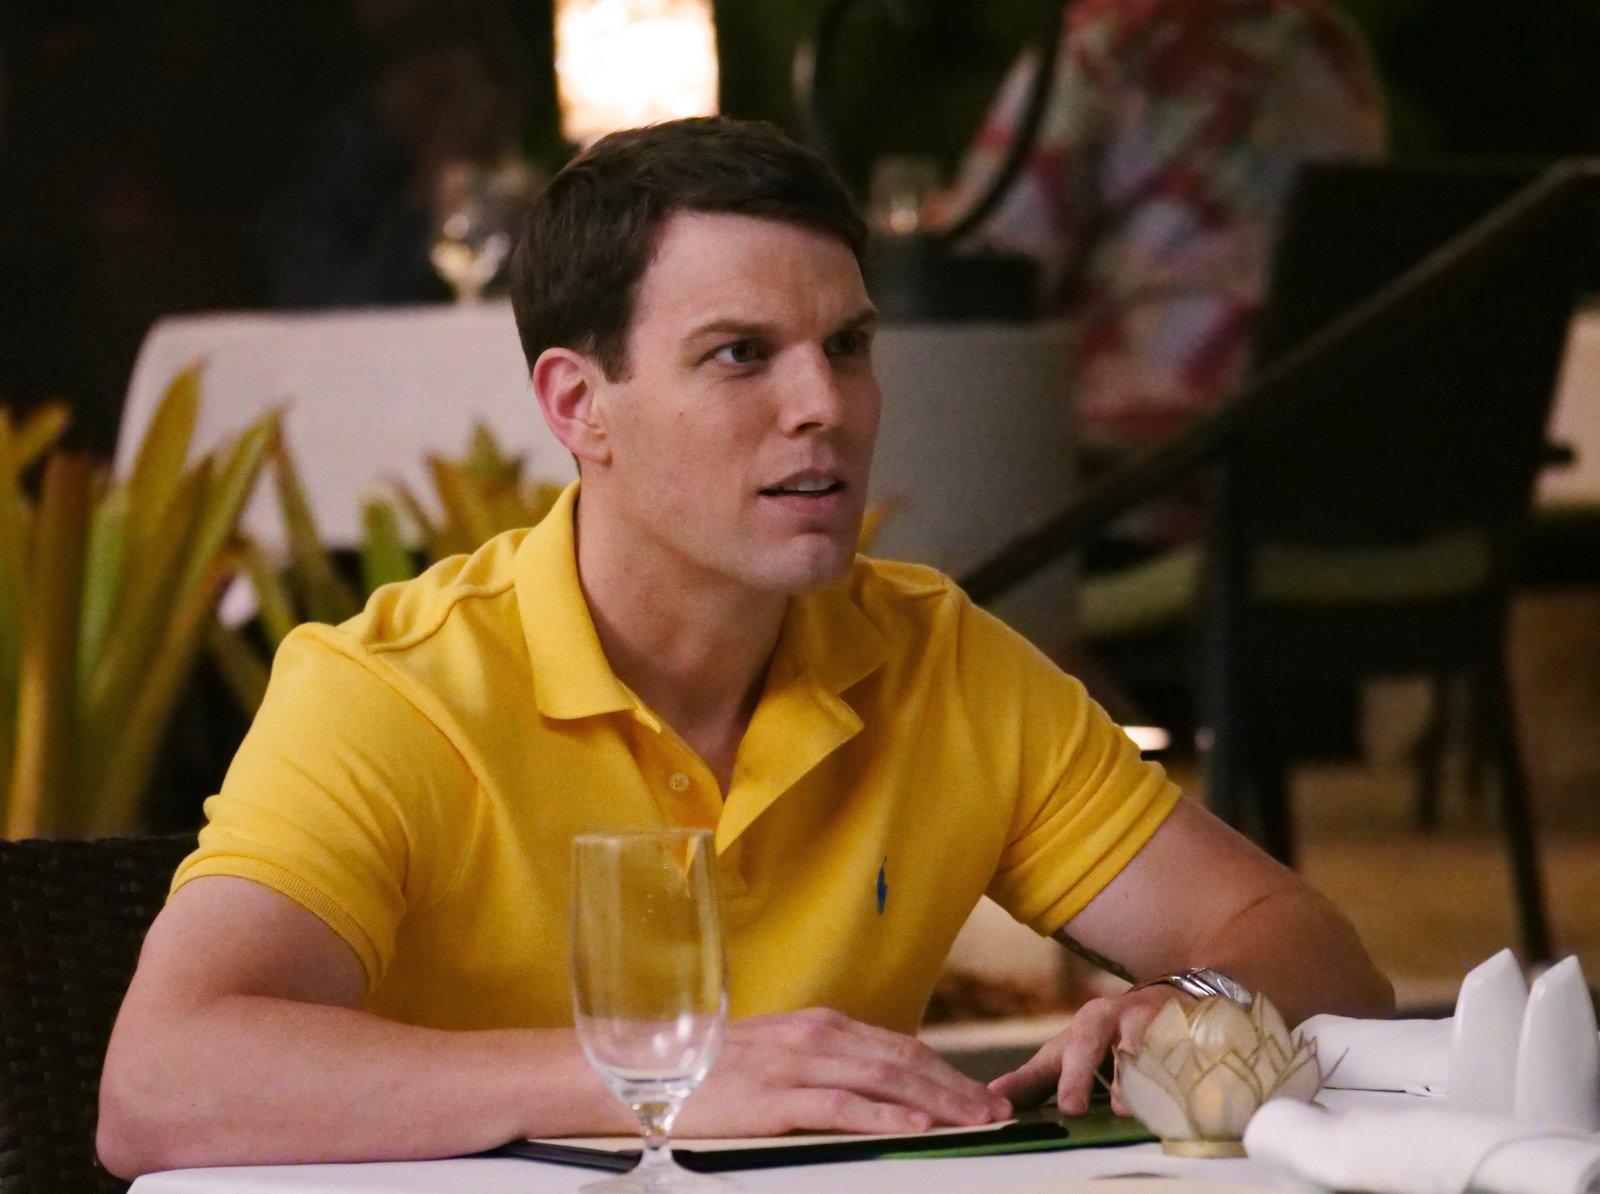 Jake Lacy as Shane in HBO's 'The White Lotus.' He's wearing a yellow polo shirt and leaning on a dinner table, which has a white table cloth and is set with utensils and glasses.